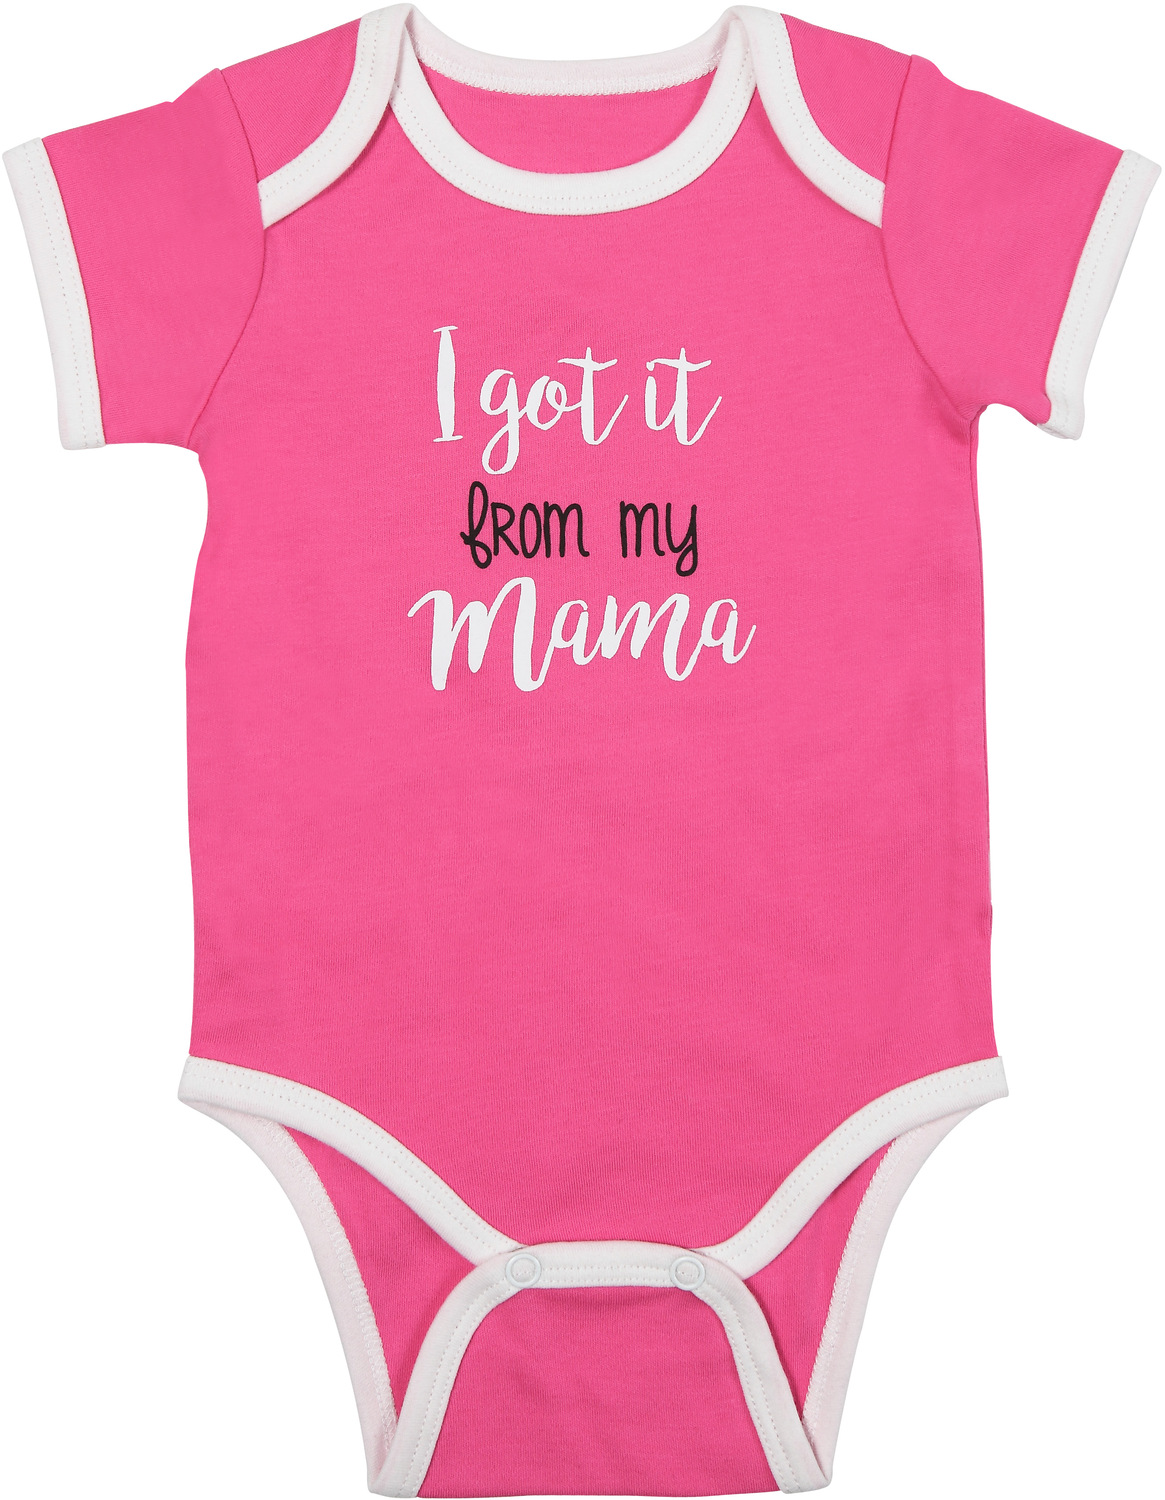 From My Mama by Sidewalk Talk - From My Mama - 6-12 Months
Pink Bodysuit